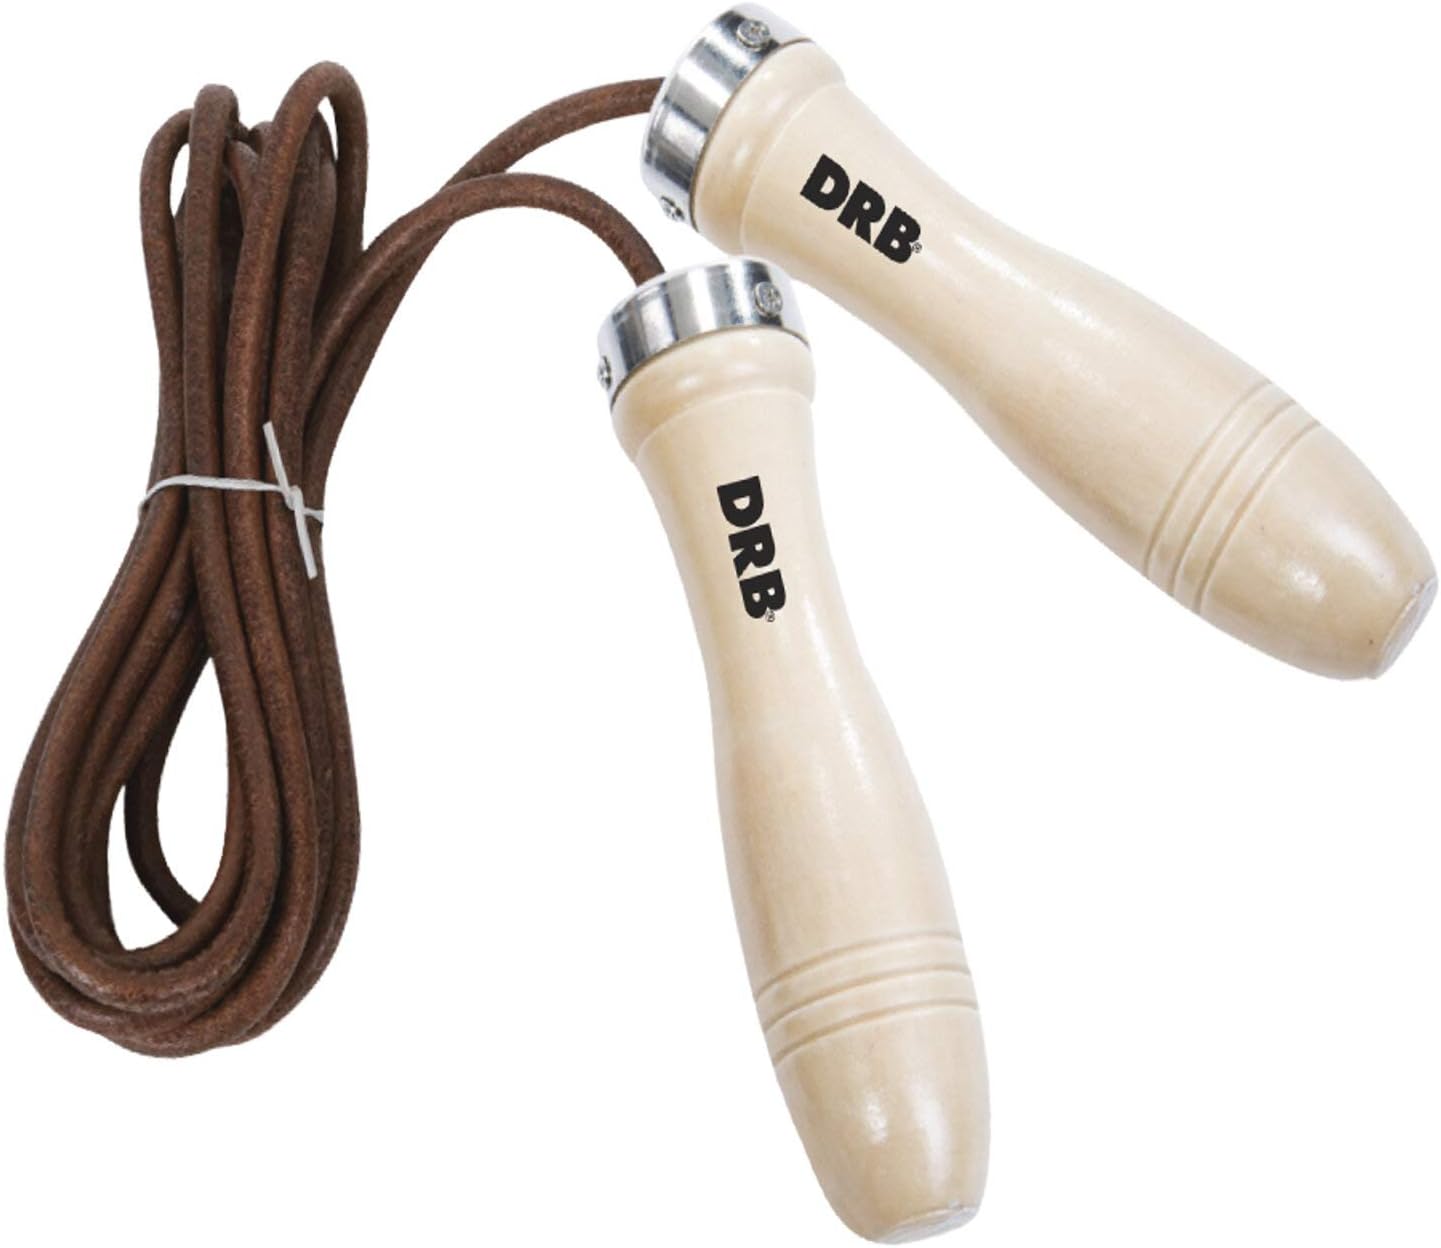 DRB DRIBBLING Leather Jump Rope with Wooden Handles for Kids Adults Unisex, Premium Speed 360 Degree Spin For Training Workout